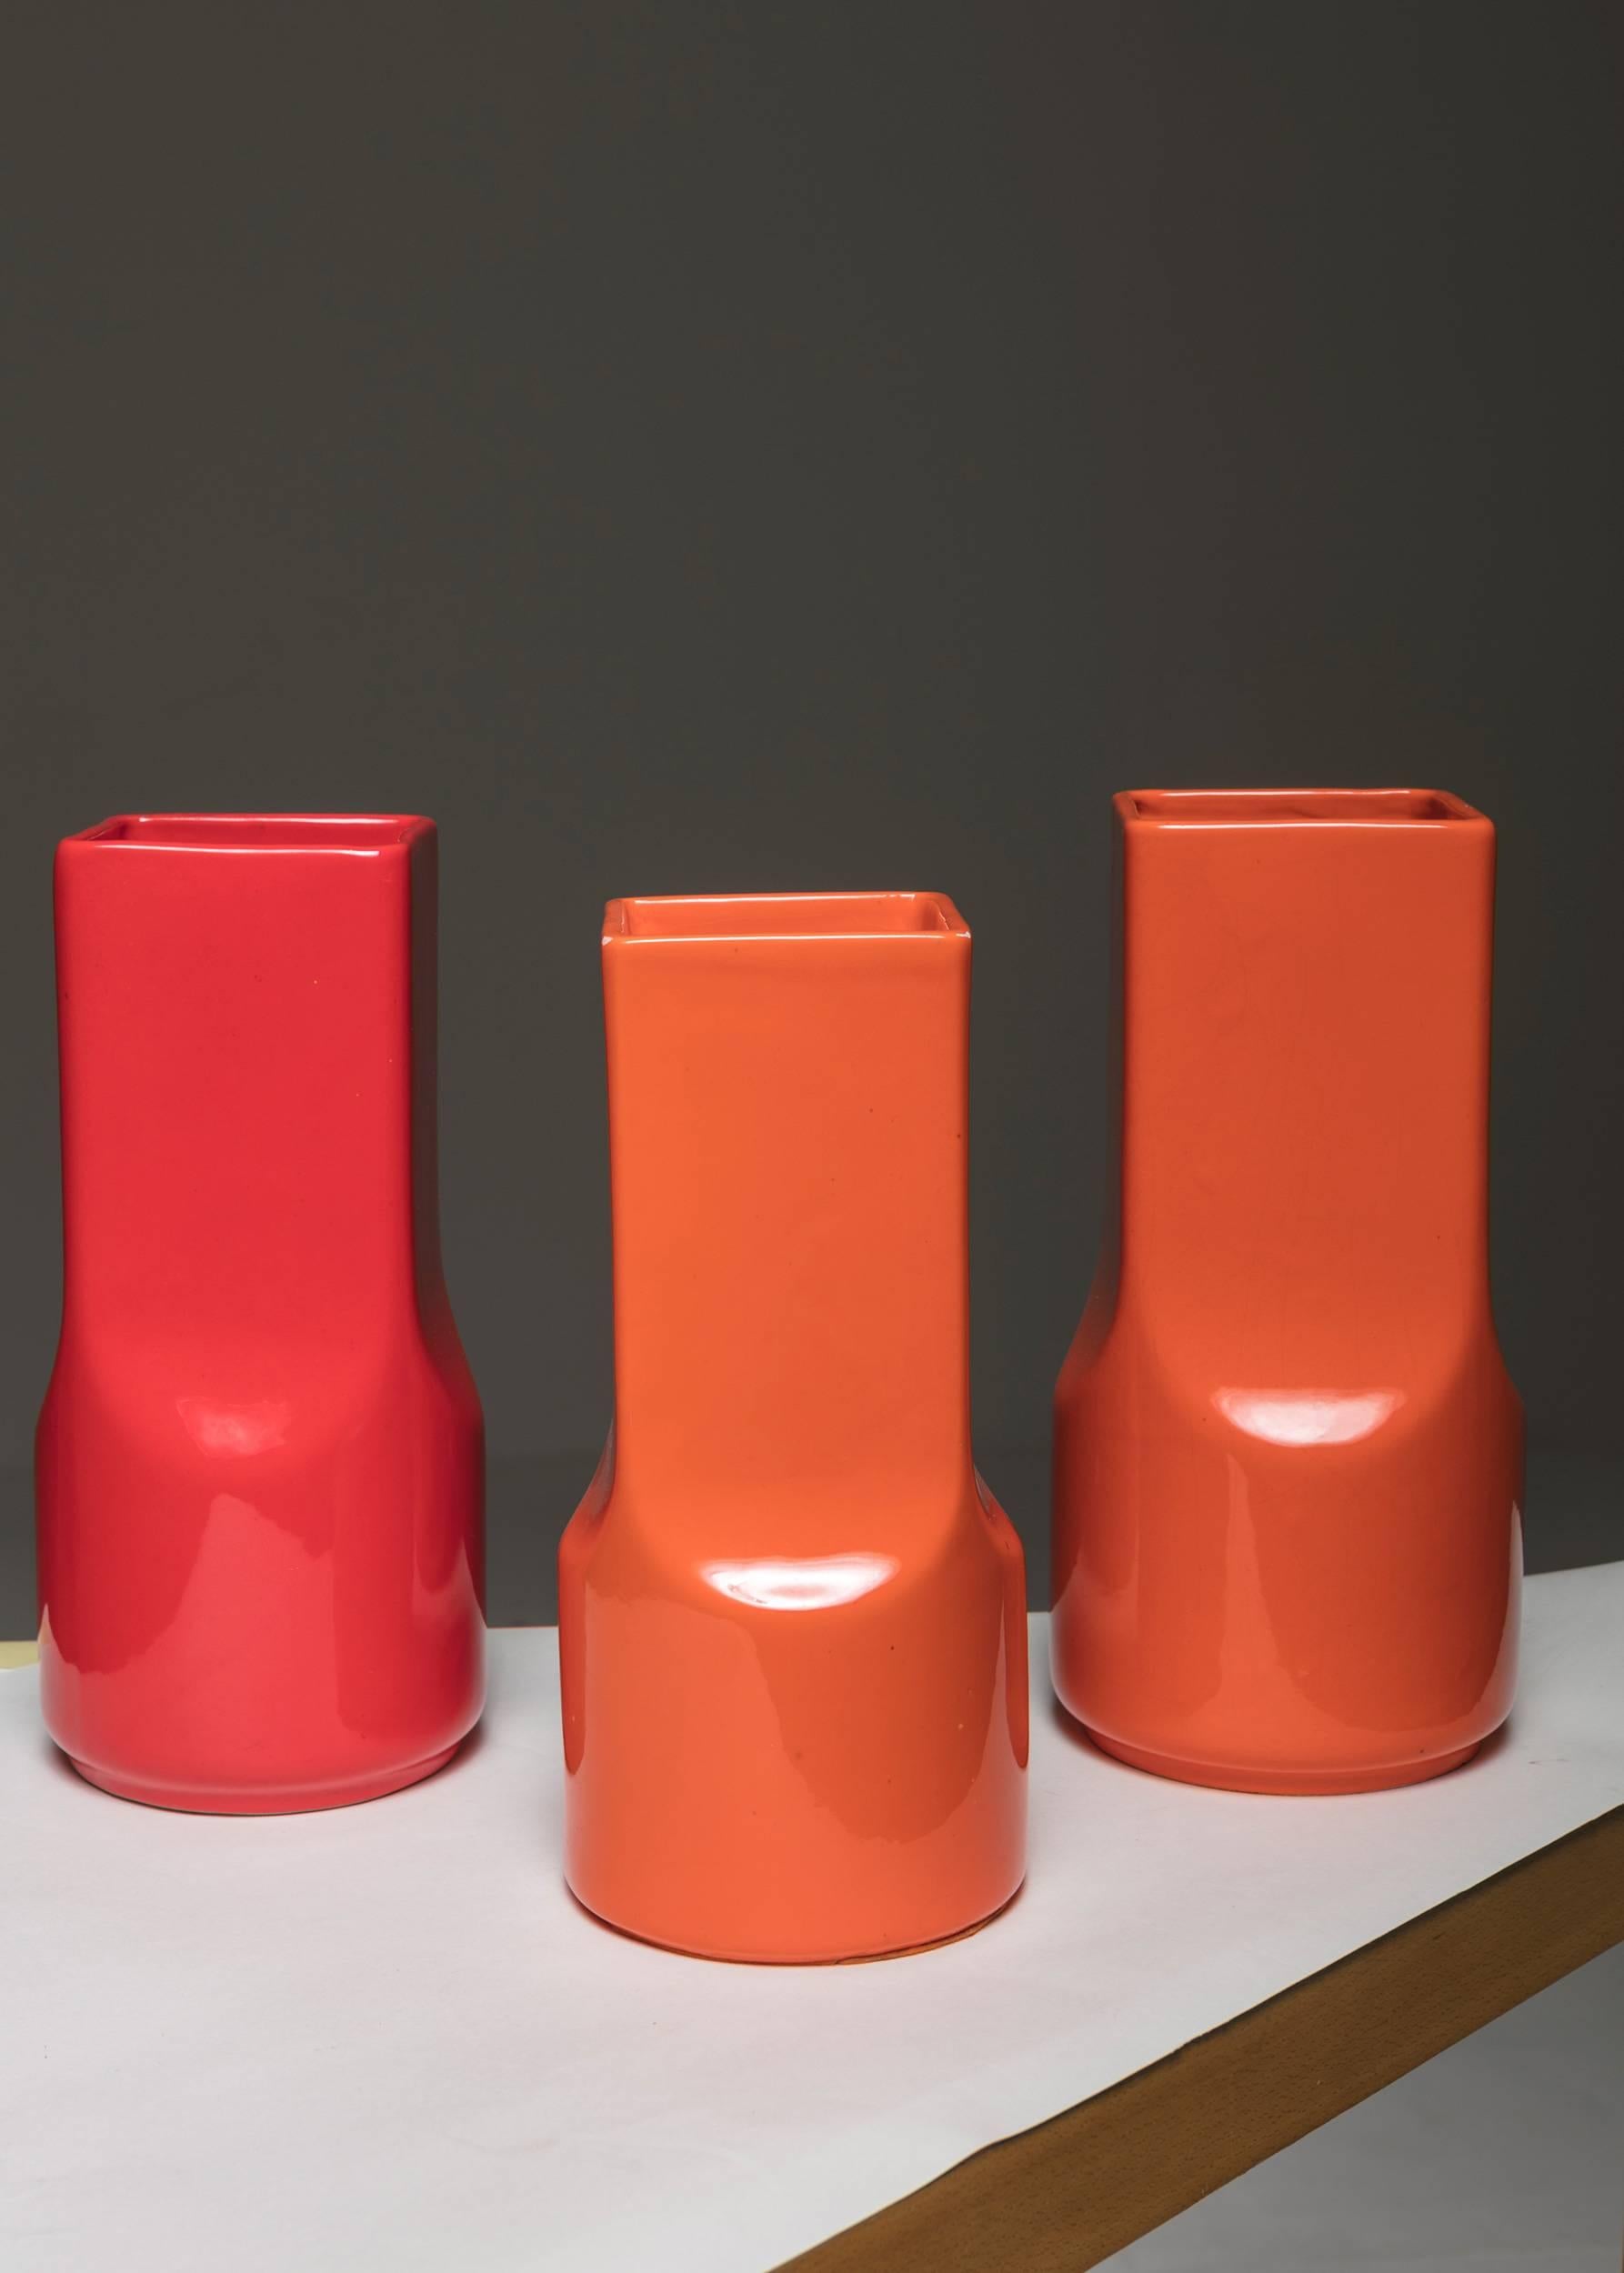 Set of thwo ceramic vases by Studio O.P.I. for Gabbianelli.
please note: currently available only one red piece and one white piece.
Price refers to the set of two pieces.